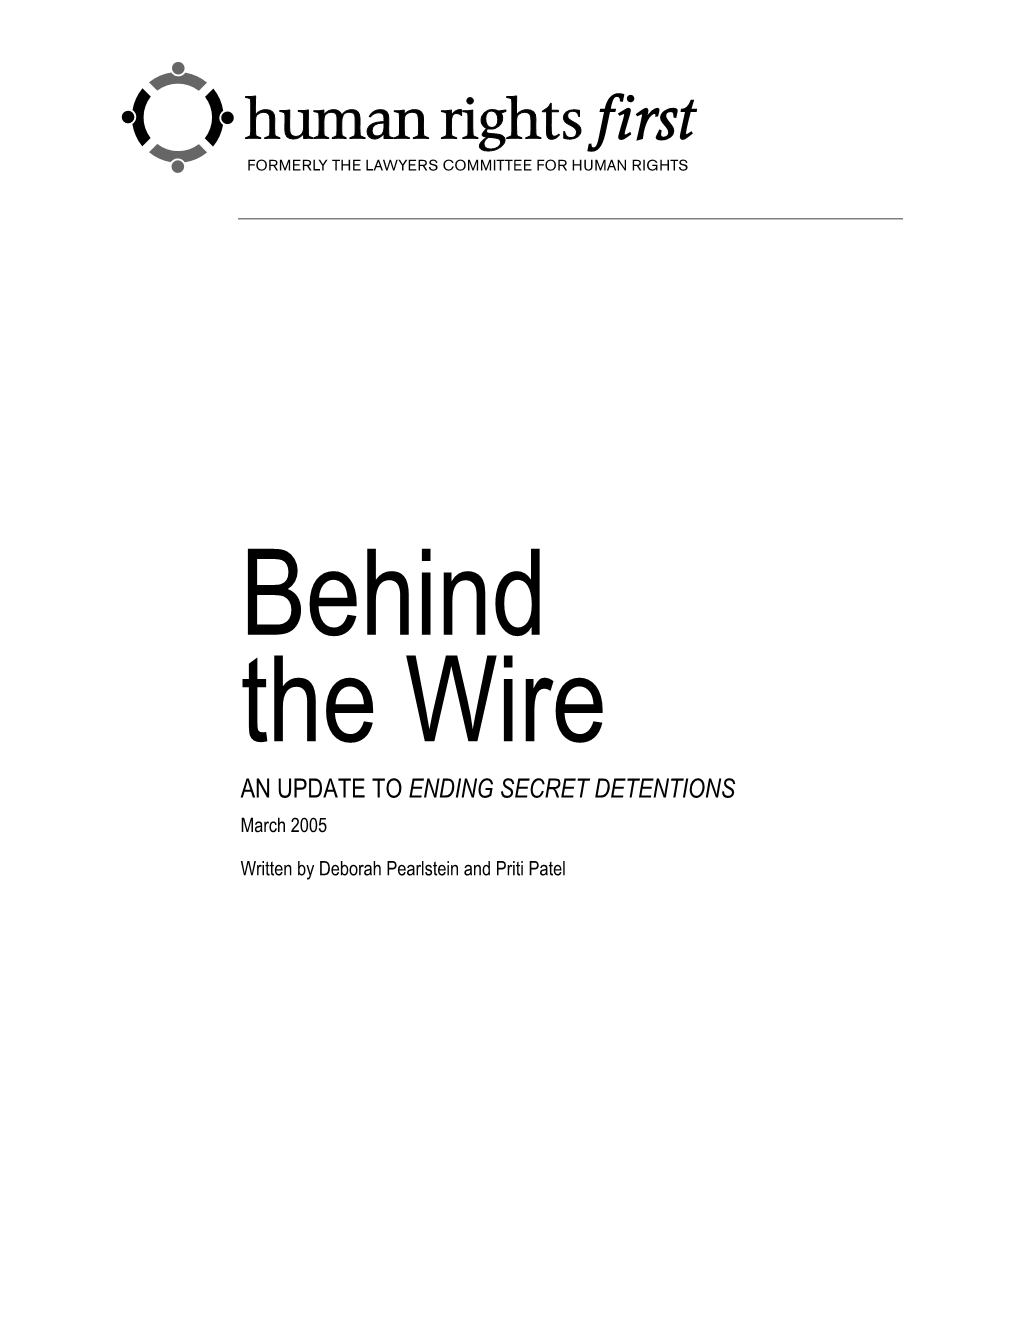 Behind the Wire: an Update to Ending Secret Detentions